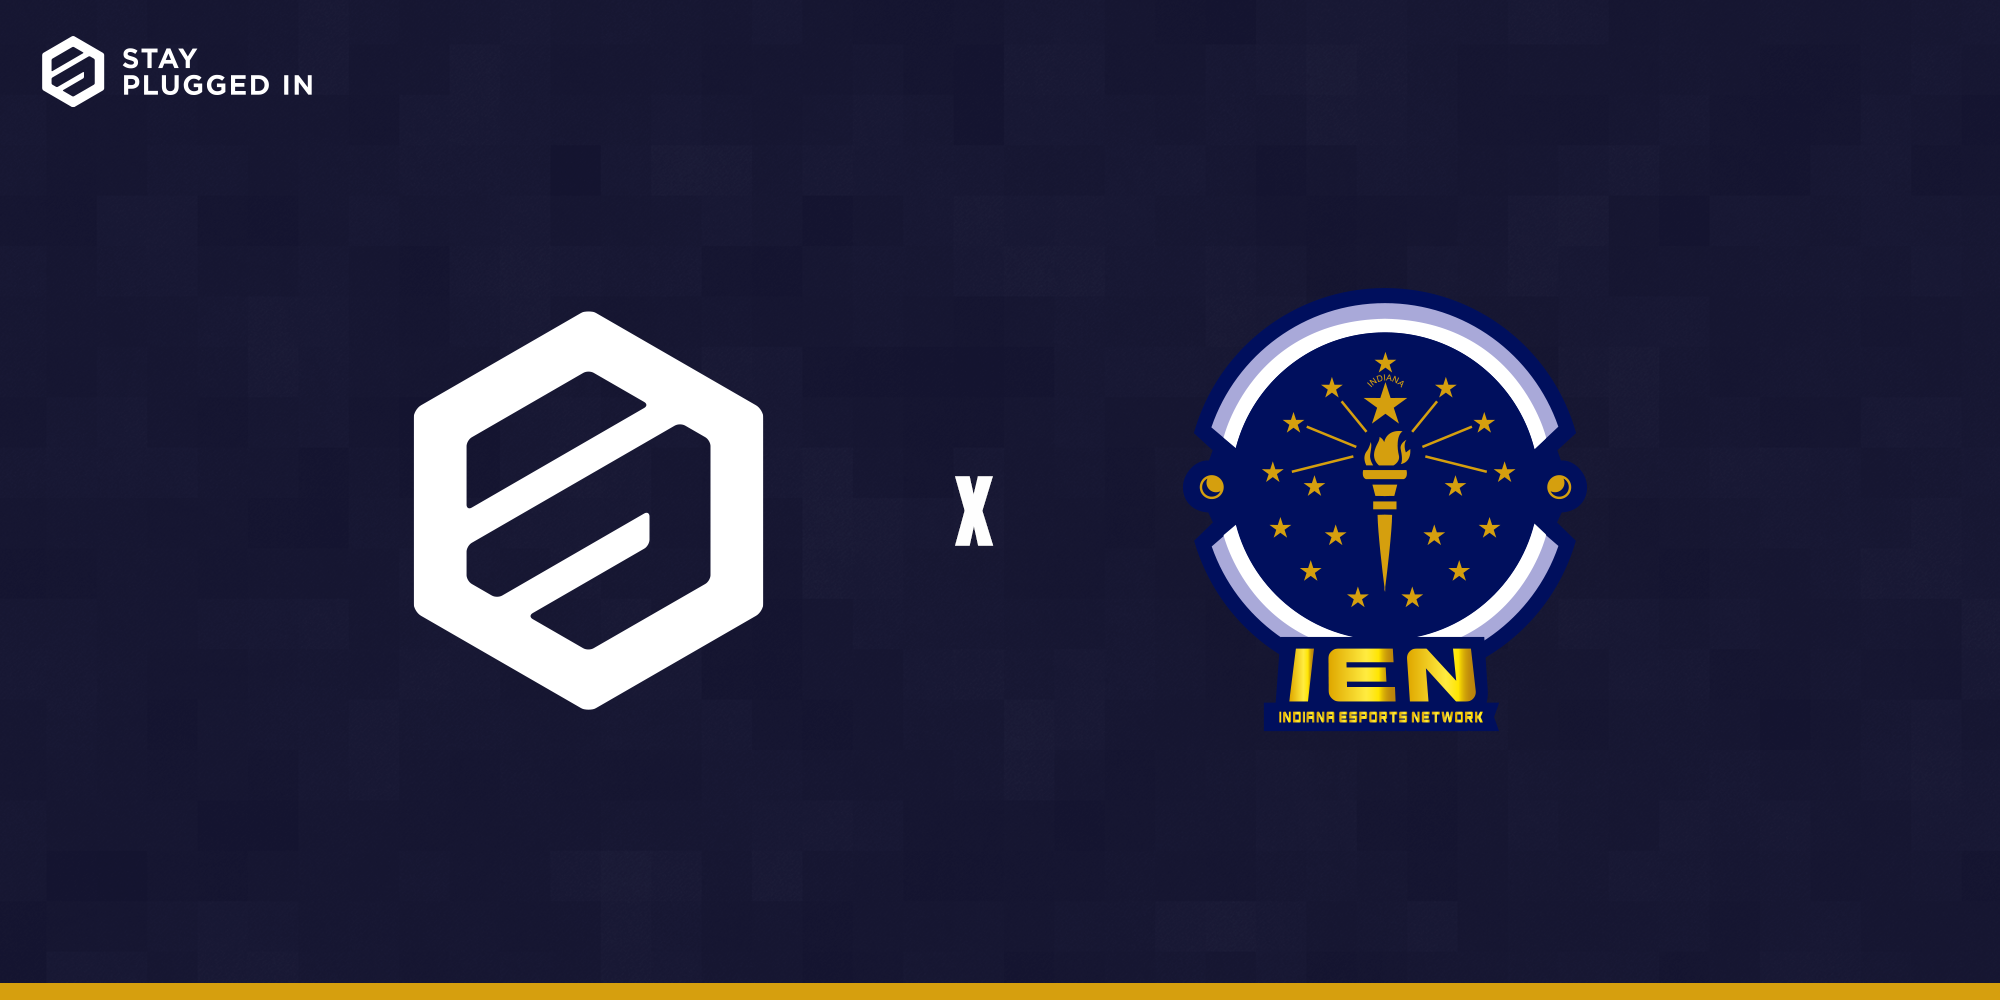 Stay Plugged In Partners with the Indiana Esports Network (IEN)